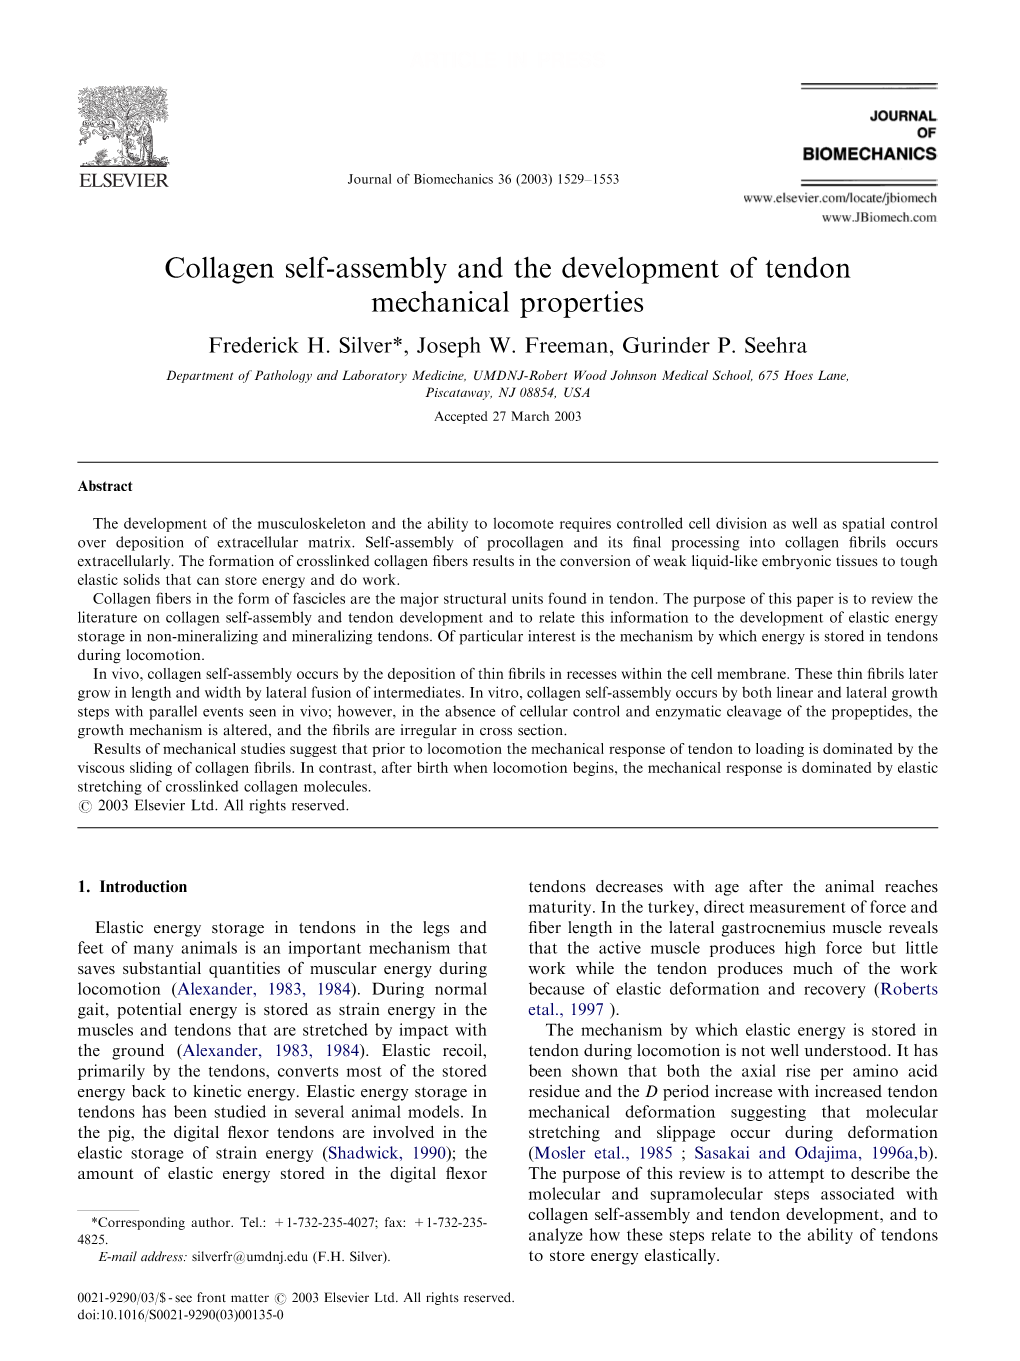 Collagen Self-Assembly and the Development of Tendon Mechanical Properties Frederick H